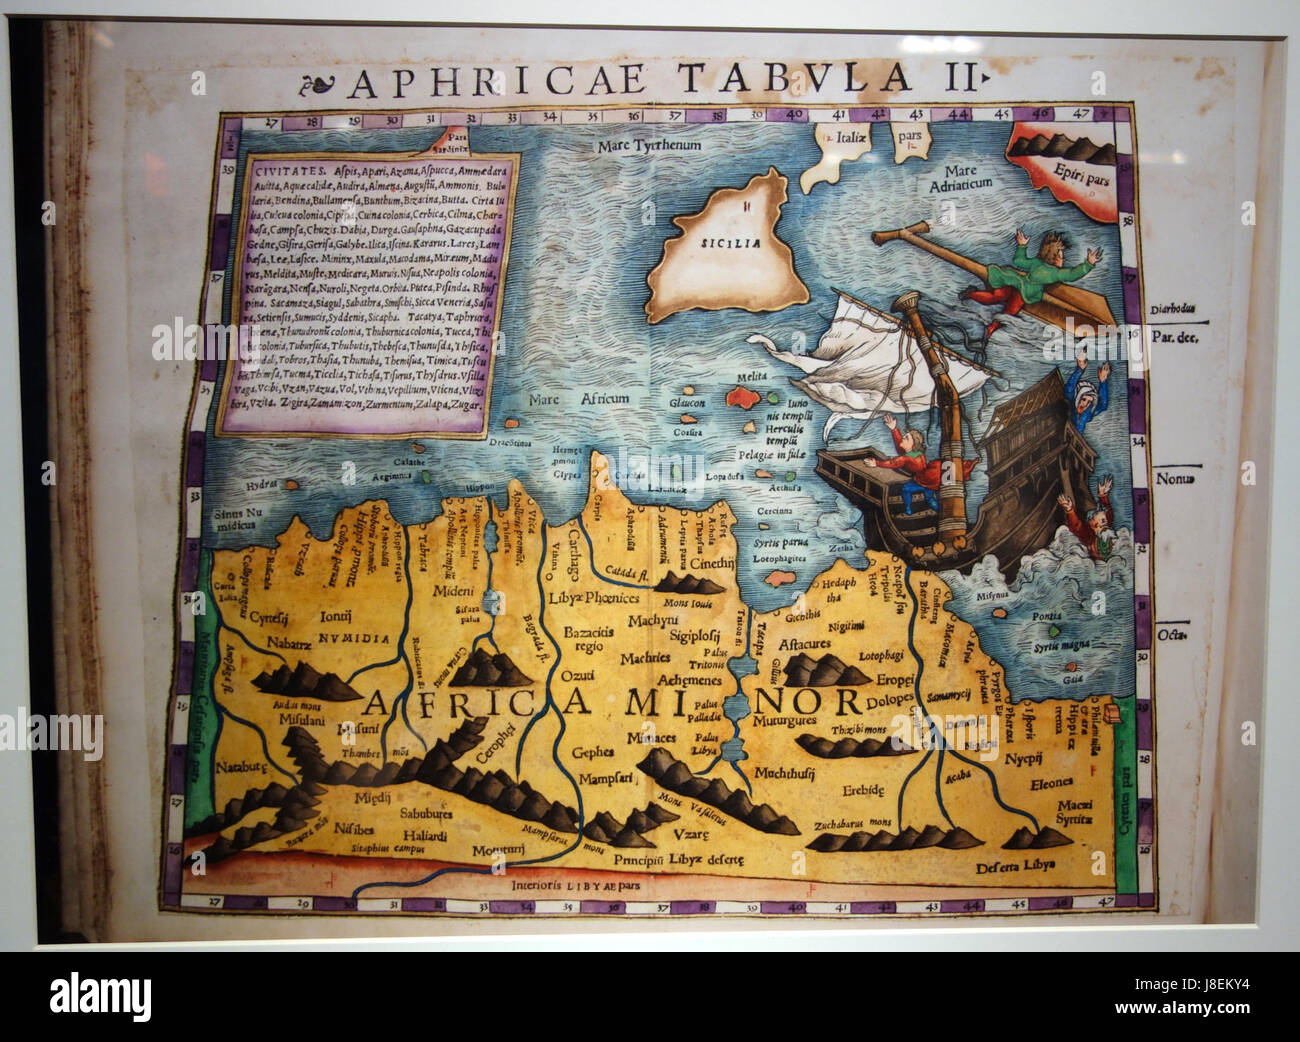 Geographia by Ptolemy, Aphricae Tabula II, 1540 Basel edition   Maps of Africa   Robert C. Williams Paper Museum   DSC00624 Stock Photo